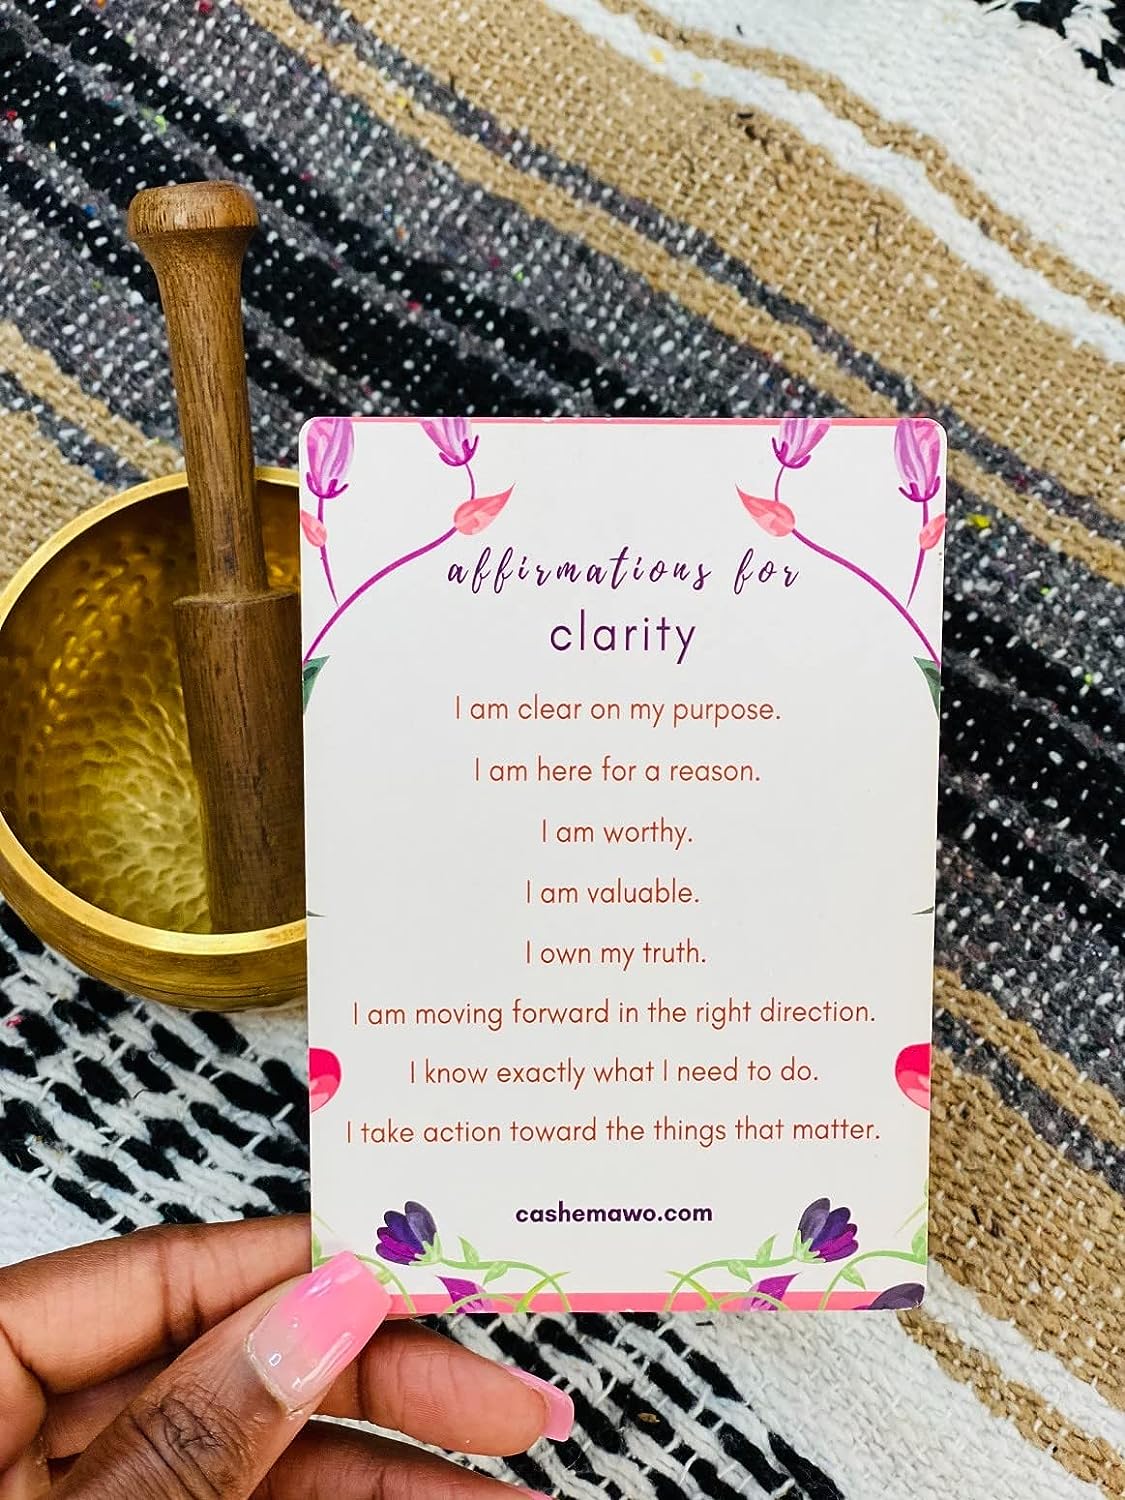 Daily Mindfulness Cards, Daily Affirmation Cards, Daily Self Love